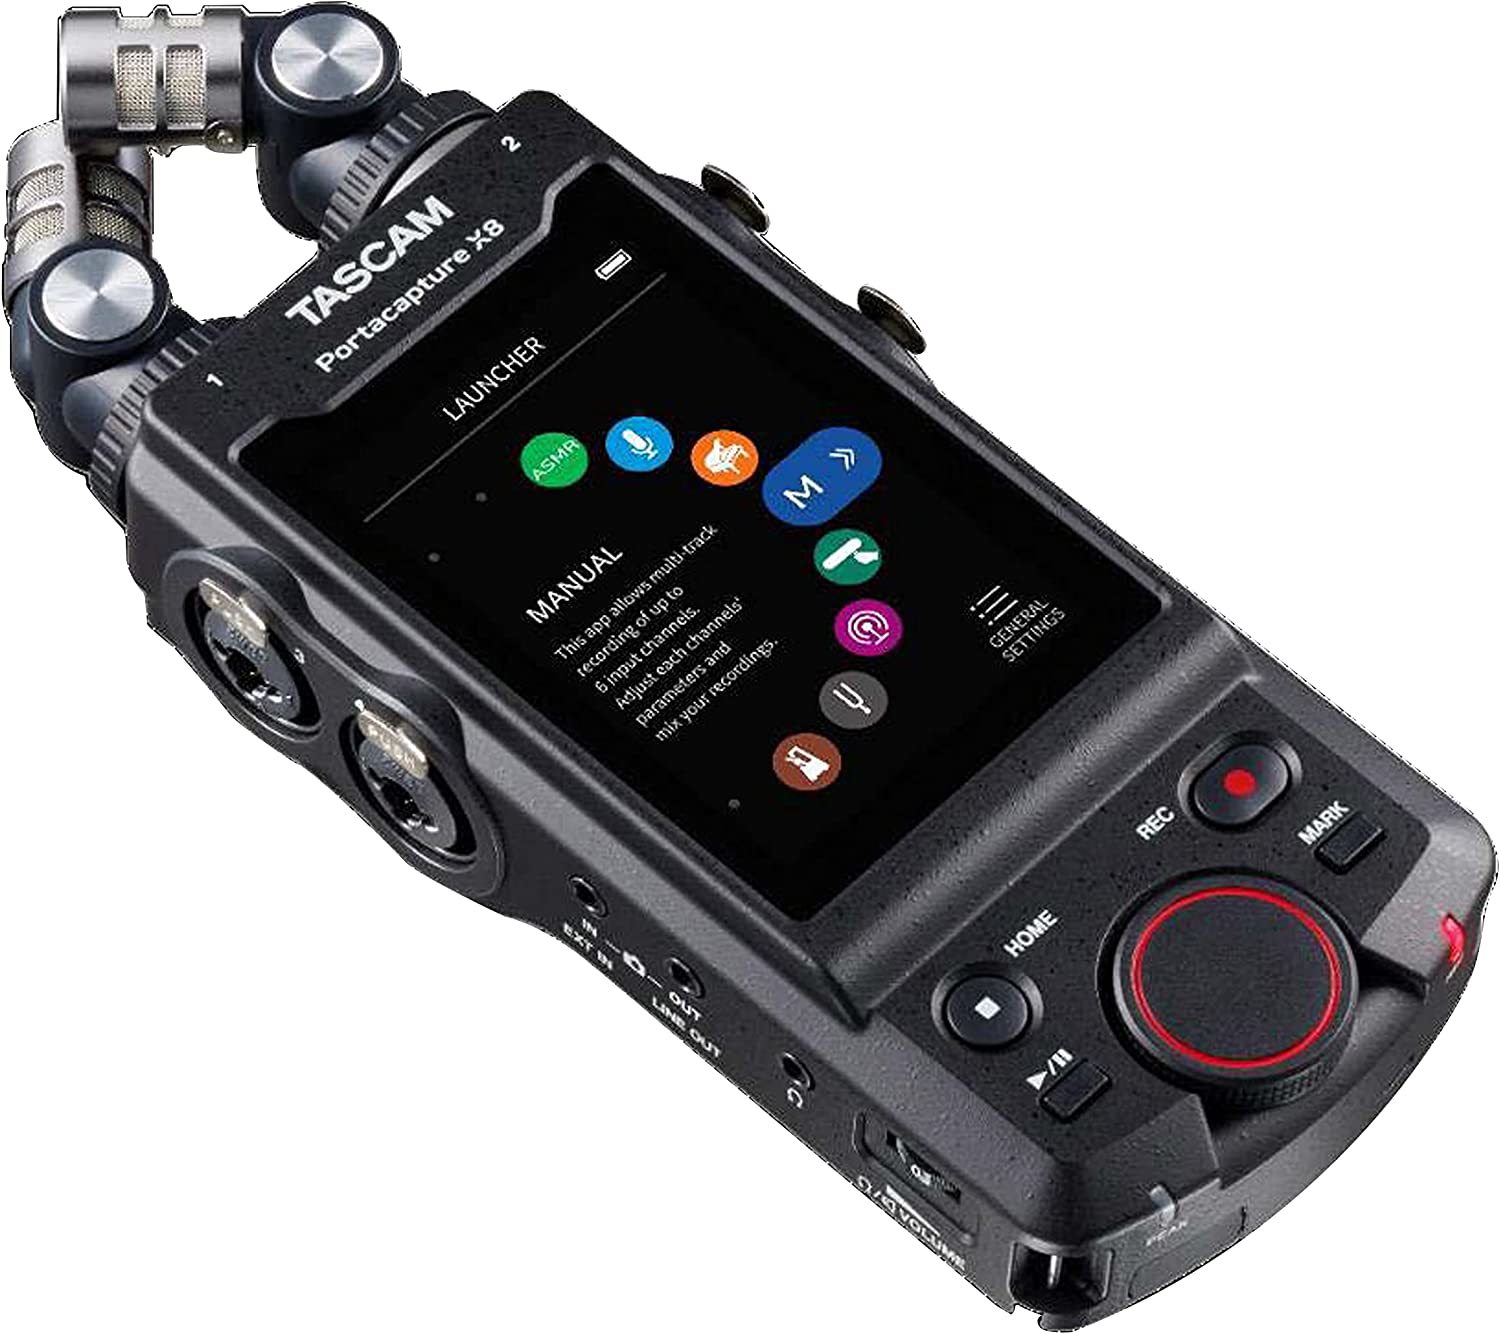 Primary image for High Resolution Adaptive Multi-Track Recorder In Black From Tascam, Model Number